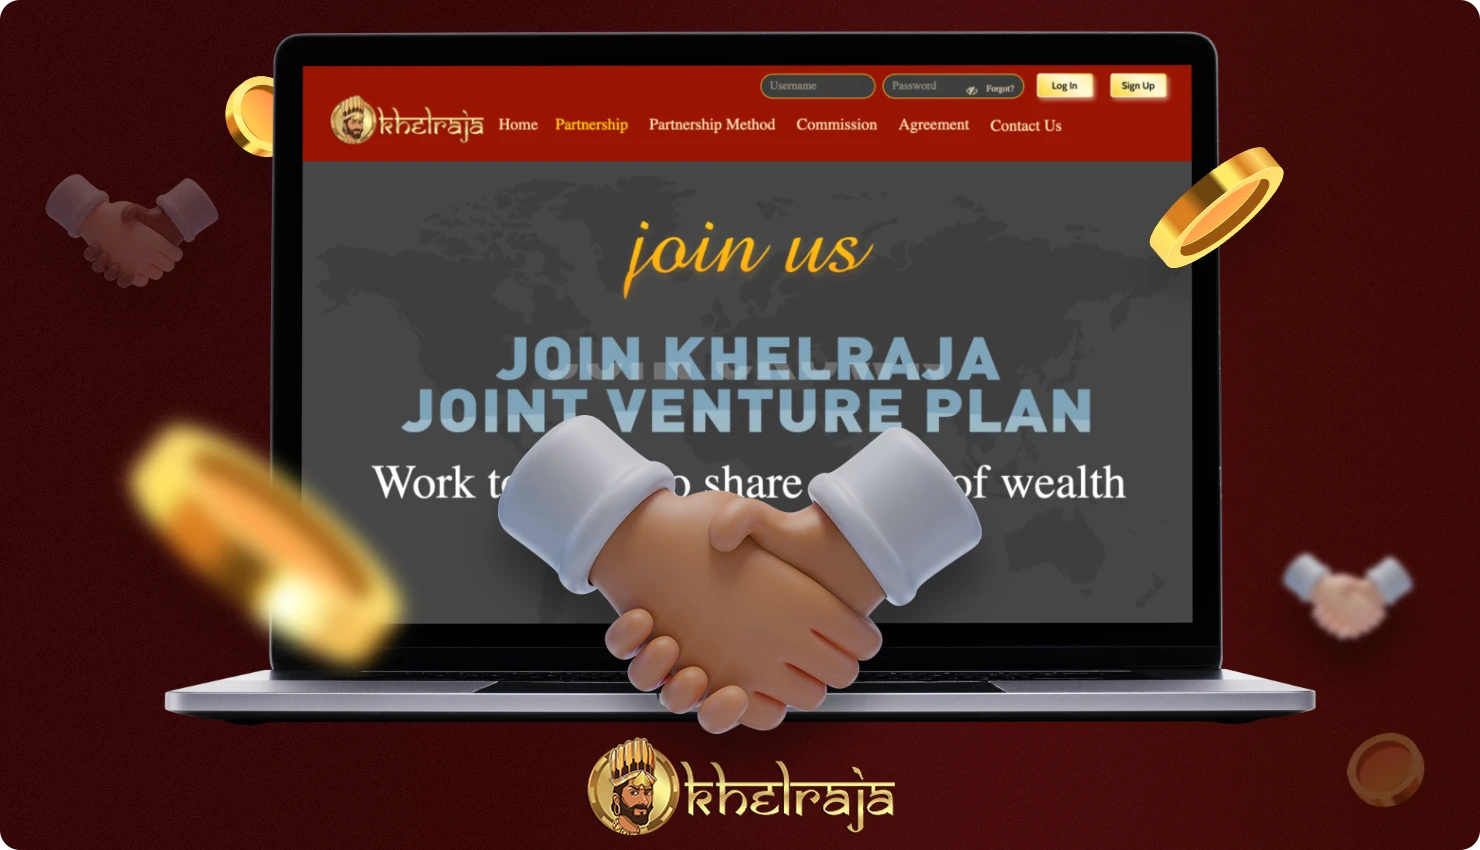 Khelraja affiliate program allows you to earn money just by inviting users to the platform